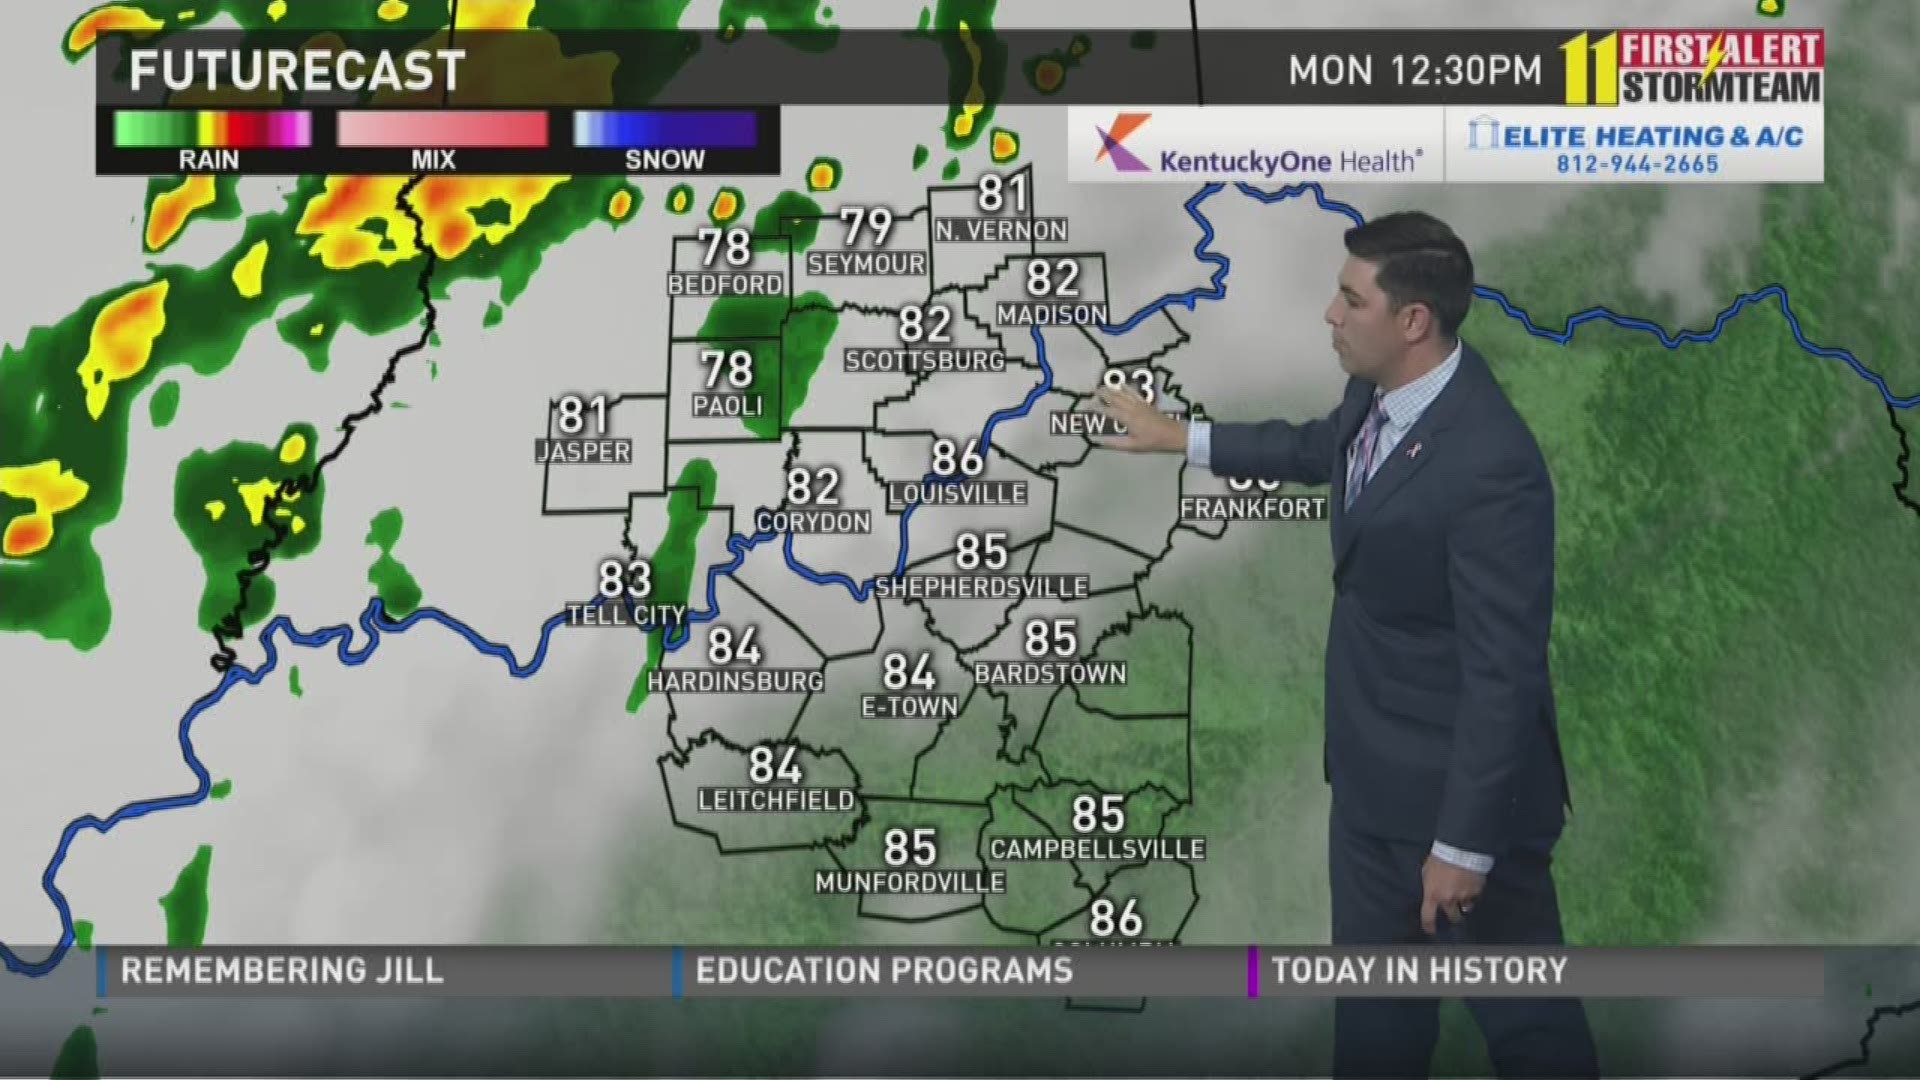 WHAS 11 First Alert Stomteam Forecast | 0